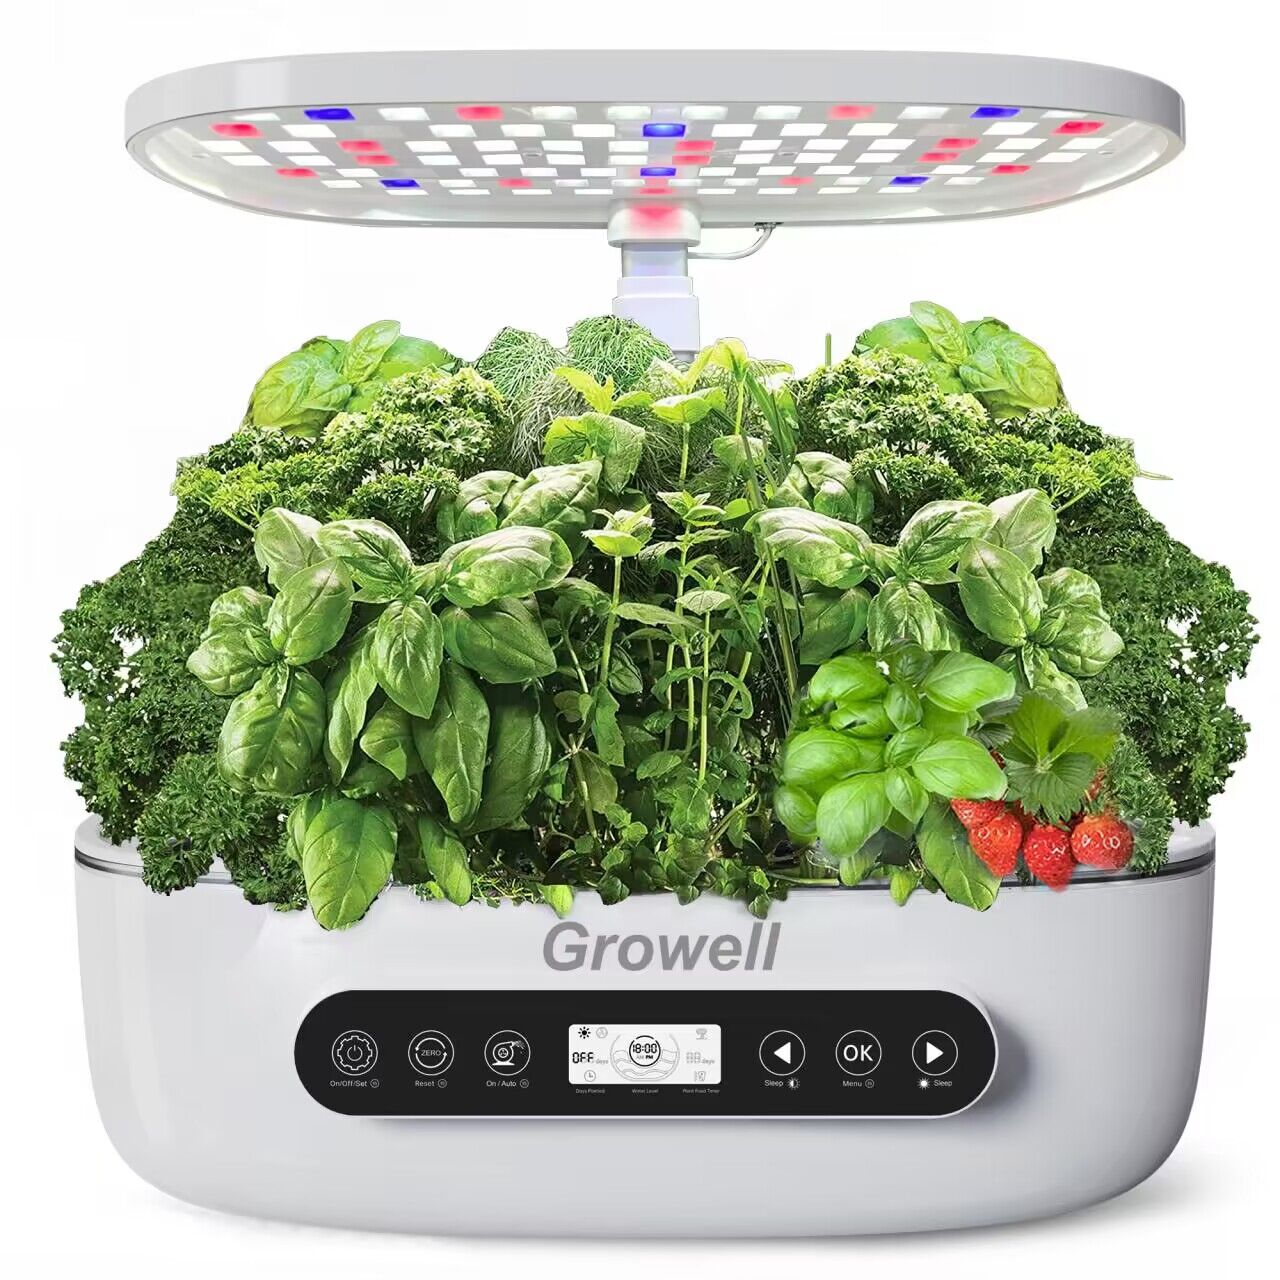 12-Pod Hydroponics Growing System, Indoor Garden with LED Grow Light, Plants Germination Kit, Built-in Fan, Automatic Timer, Adjustable Height for Home, Office